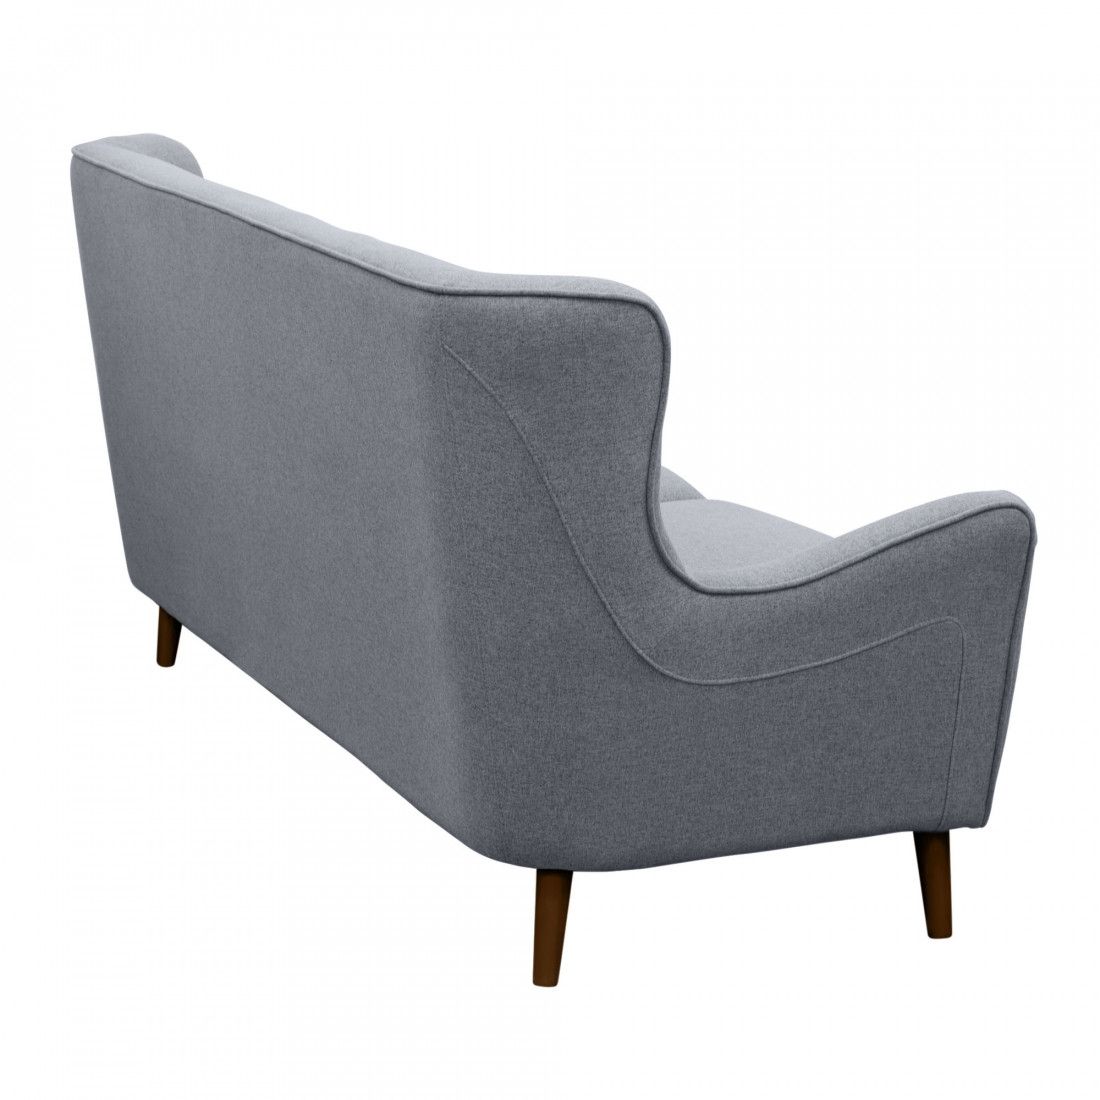 Jasper Retro Sofa With Button Tuft And Wood Leg In Grey With Retro Sofas And Chairs (View 4 of 15)